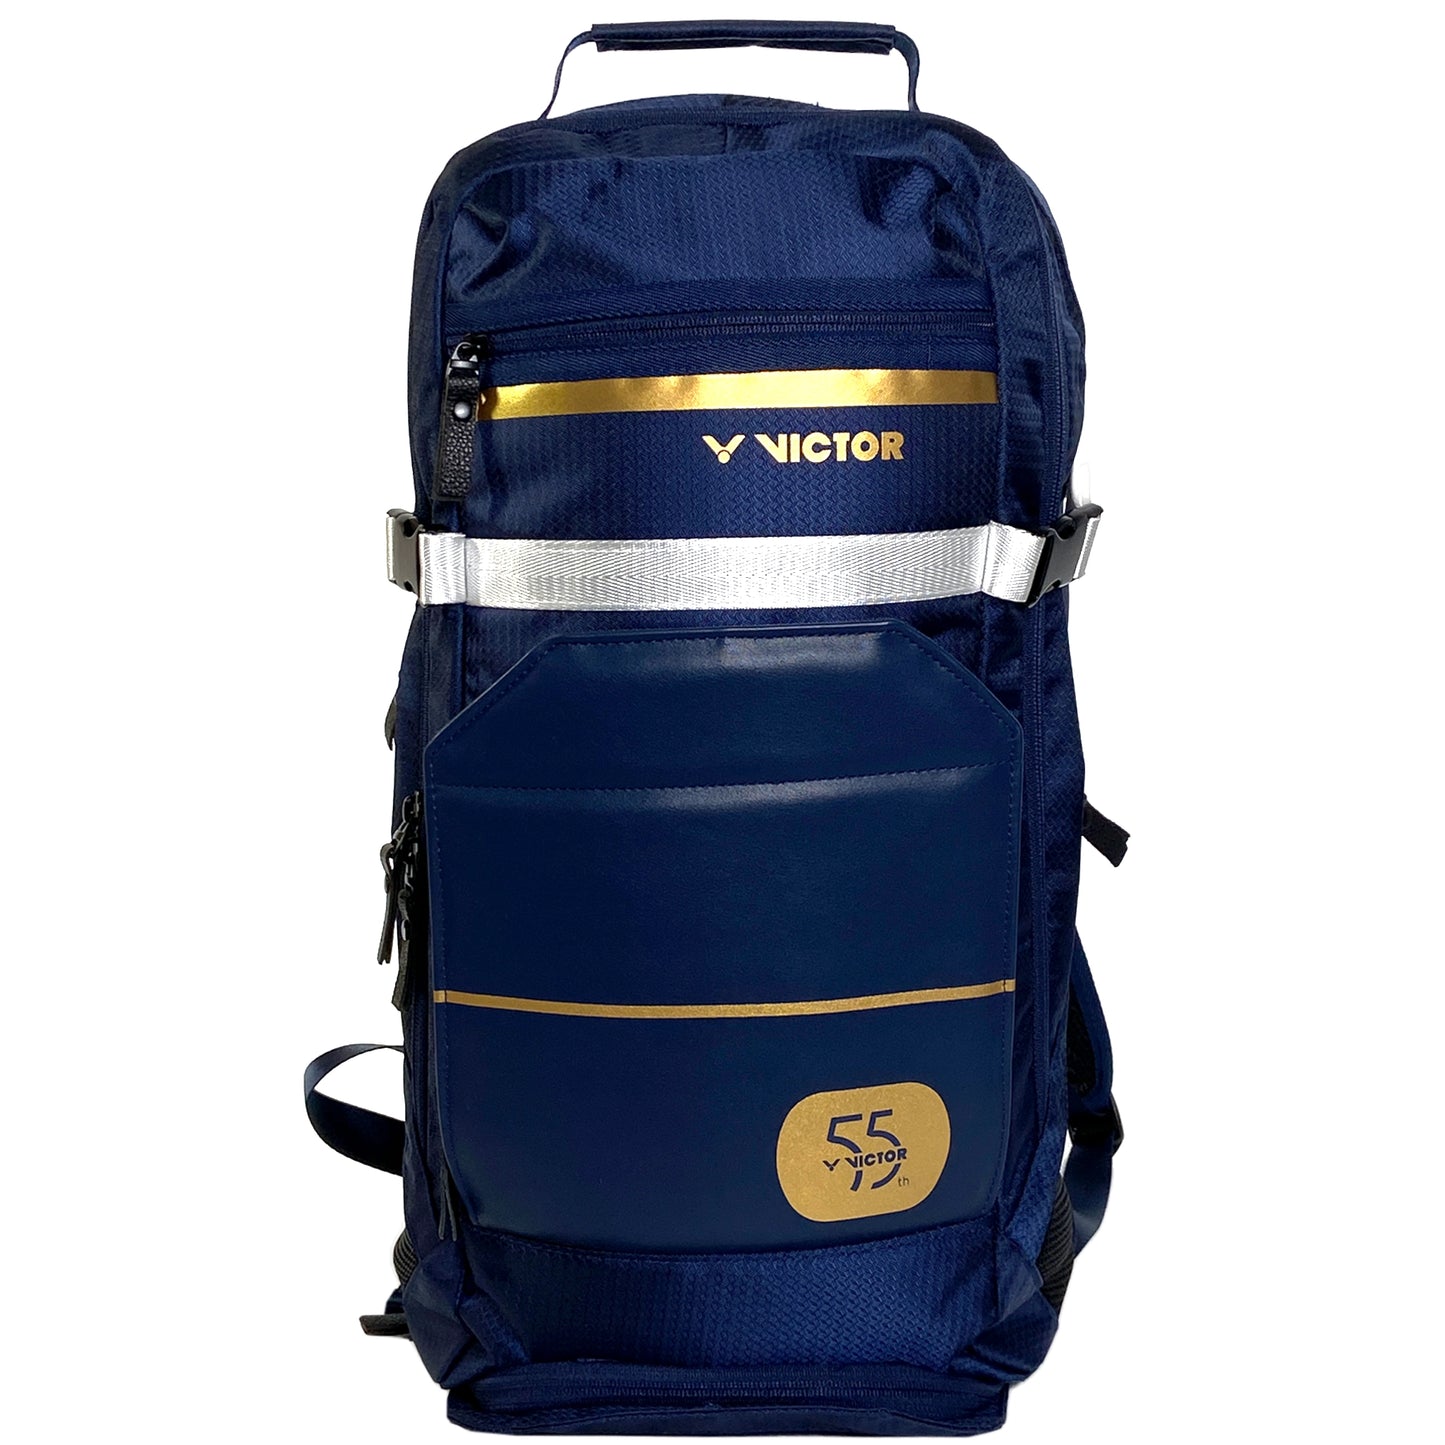 Victor 55th Anniversary Backpack - Medieval Blue (BR9012-55-B)